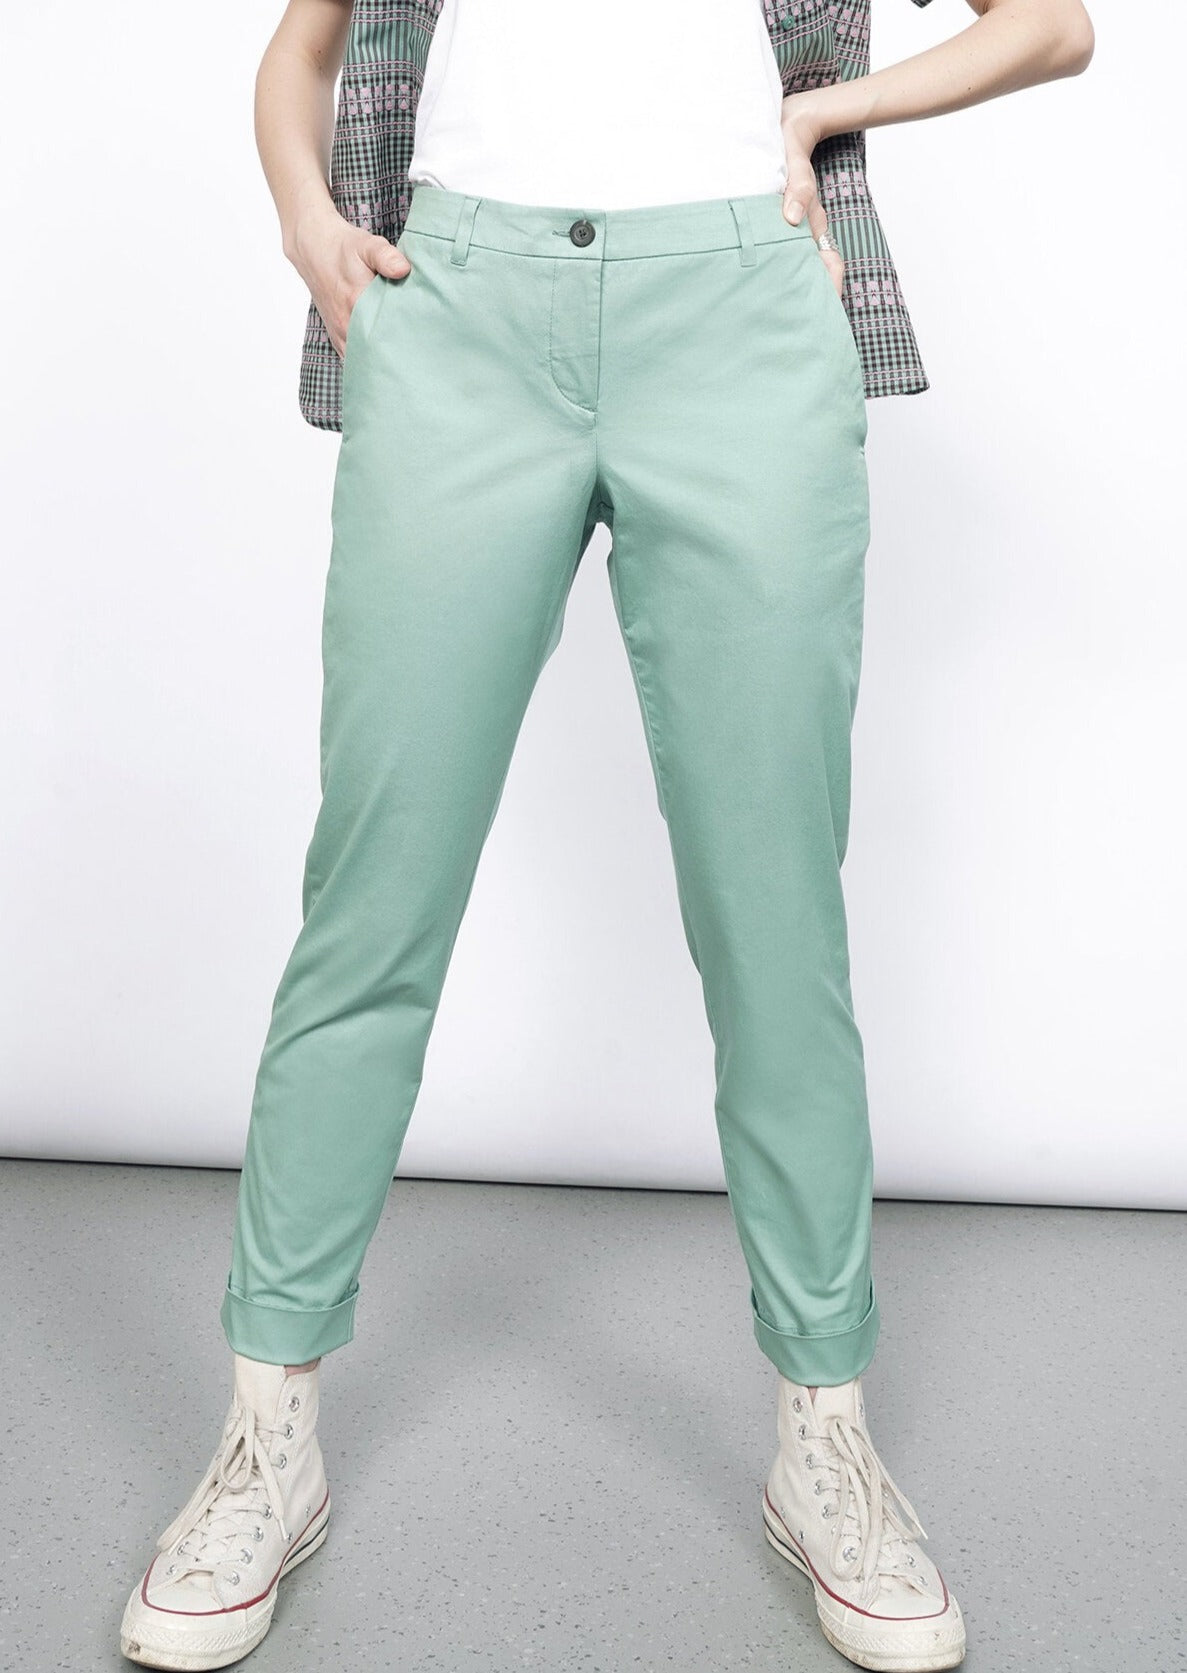 Model wearing the Essential Trouser in Sage in size 4, with a white T and the Essential Button Up in Gingham Sage